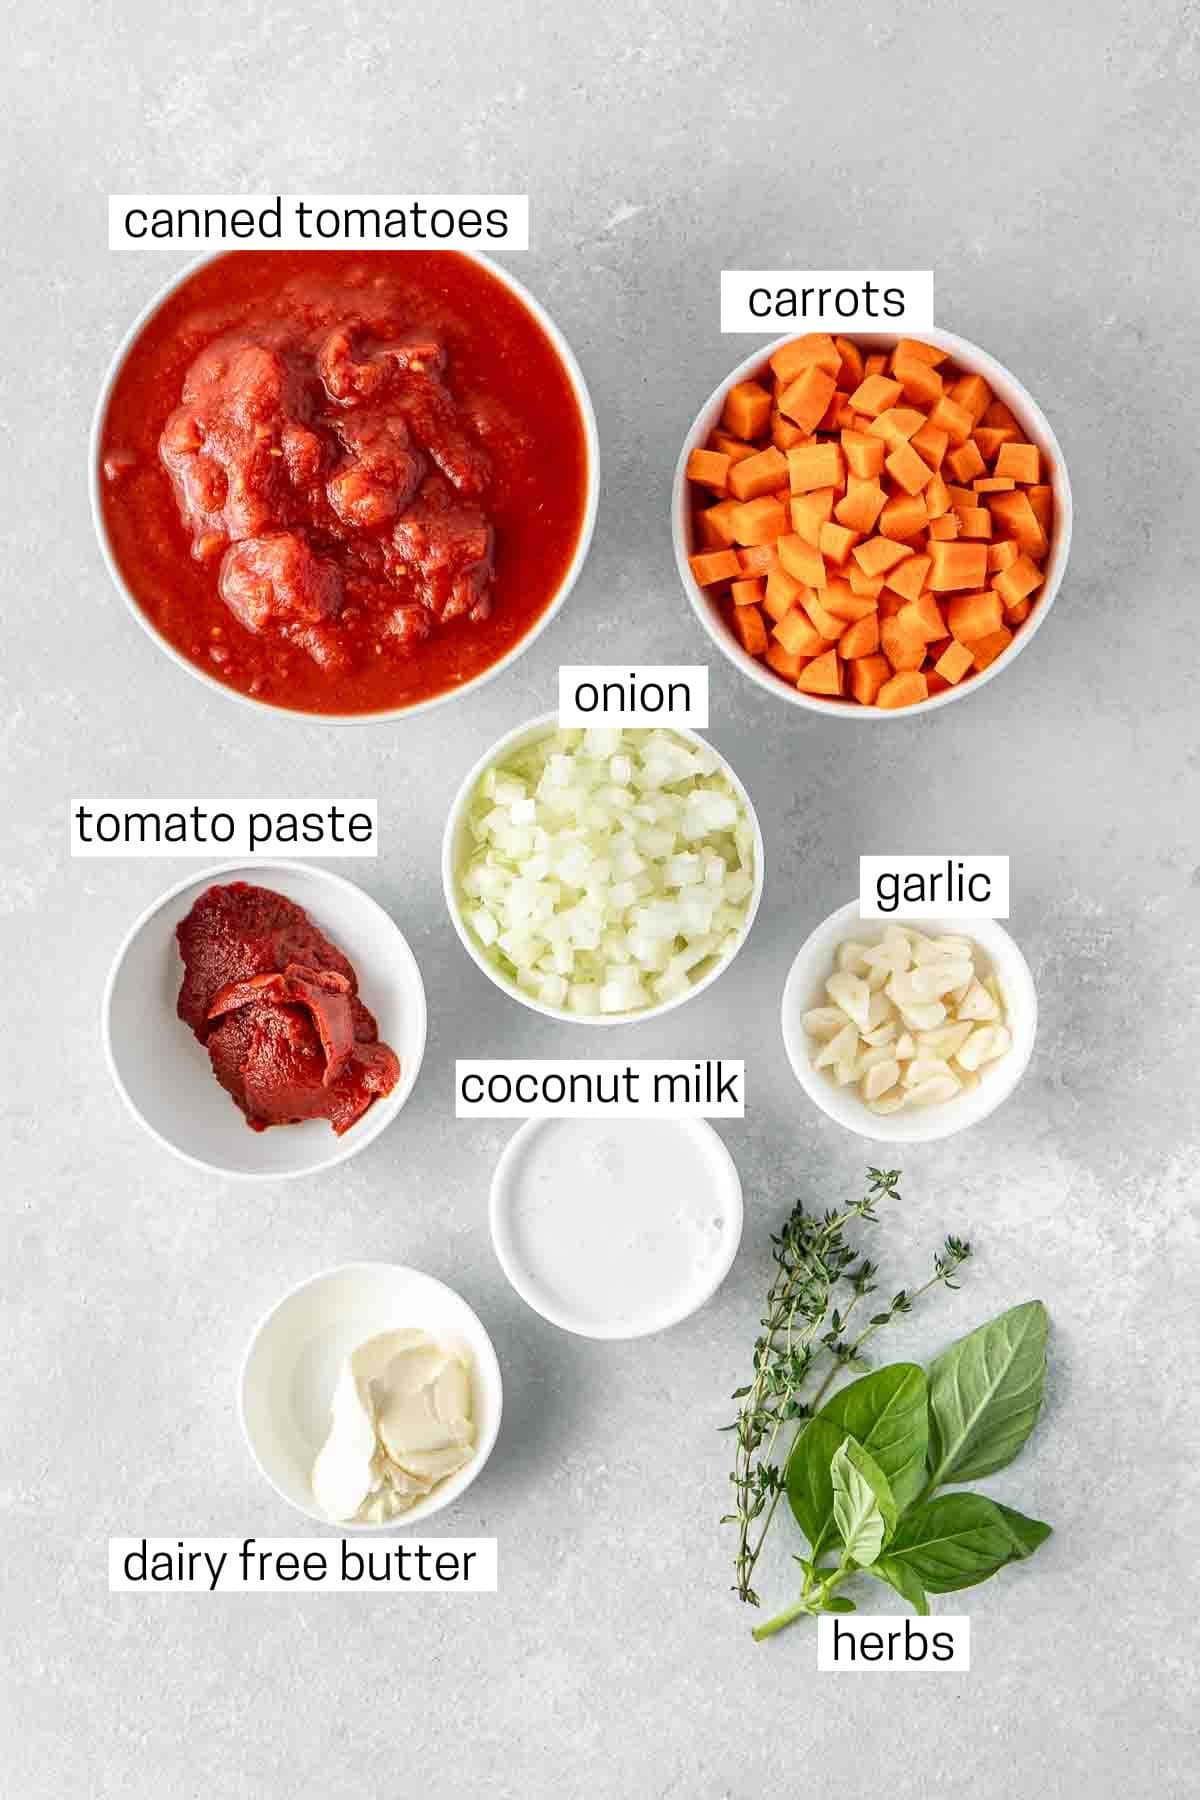 All ingredients needed to make vegan tomato soup laid out in small bowls.